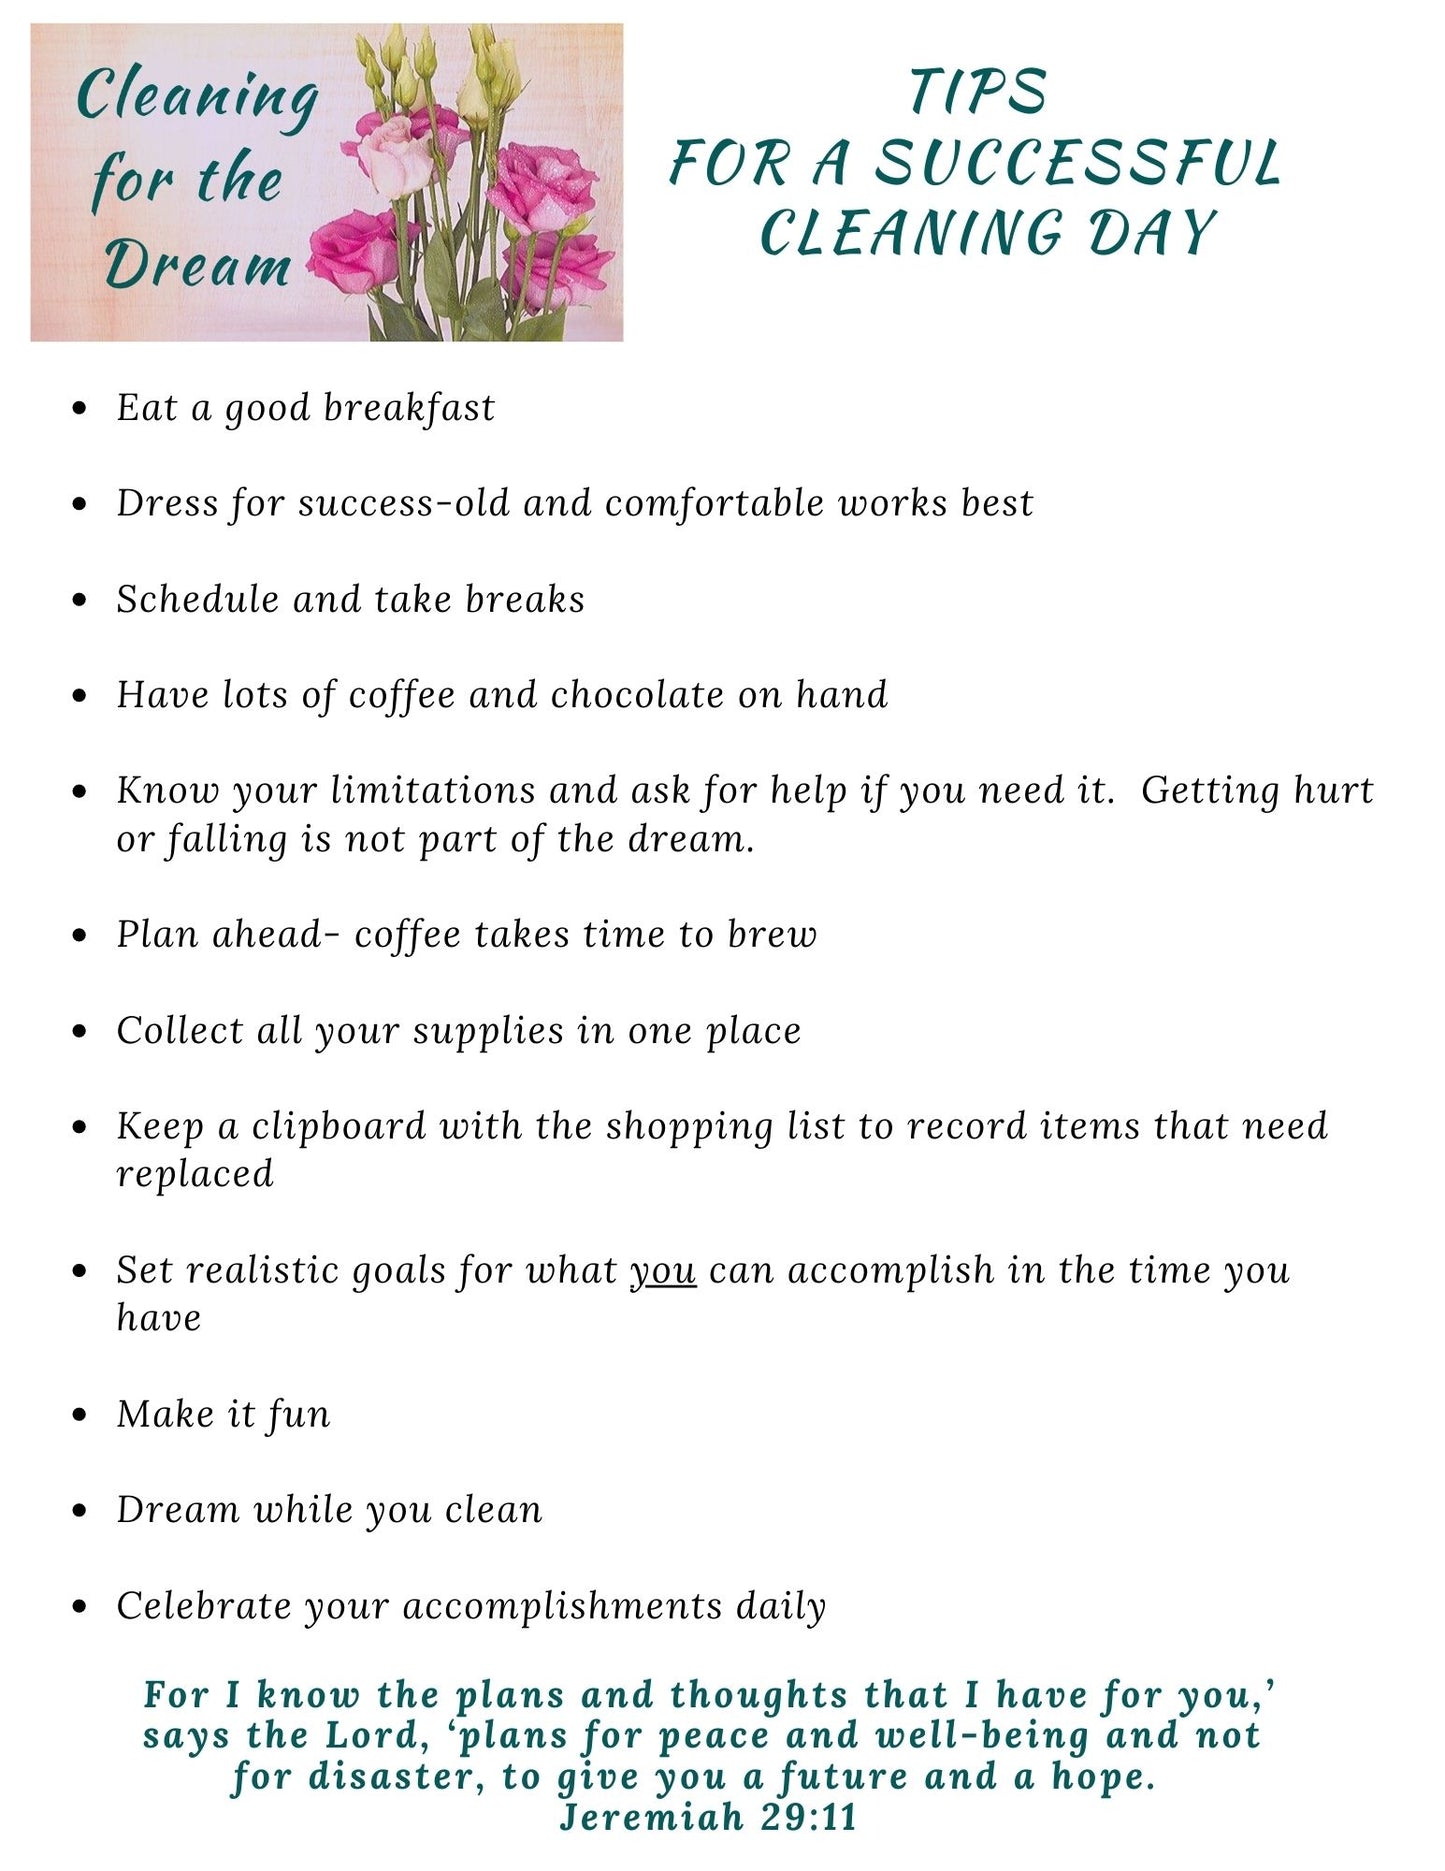 Cleaning for the Dream Guide and Worksheets PDF